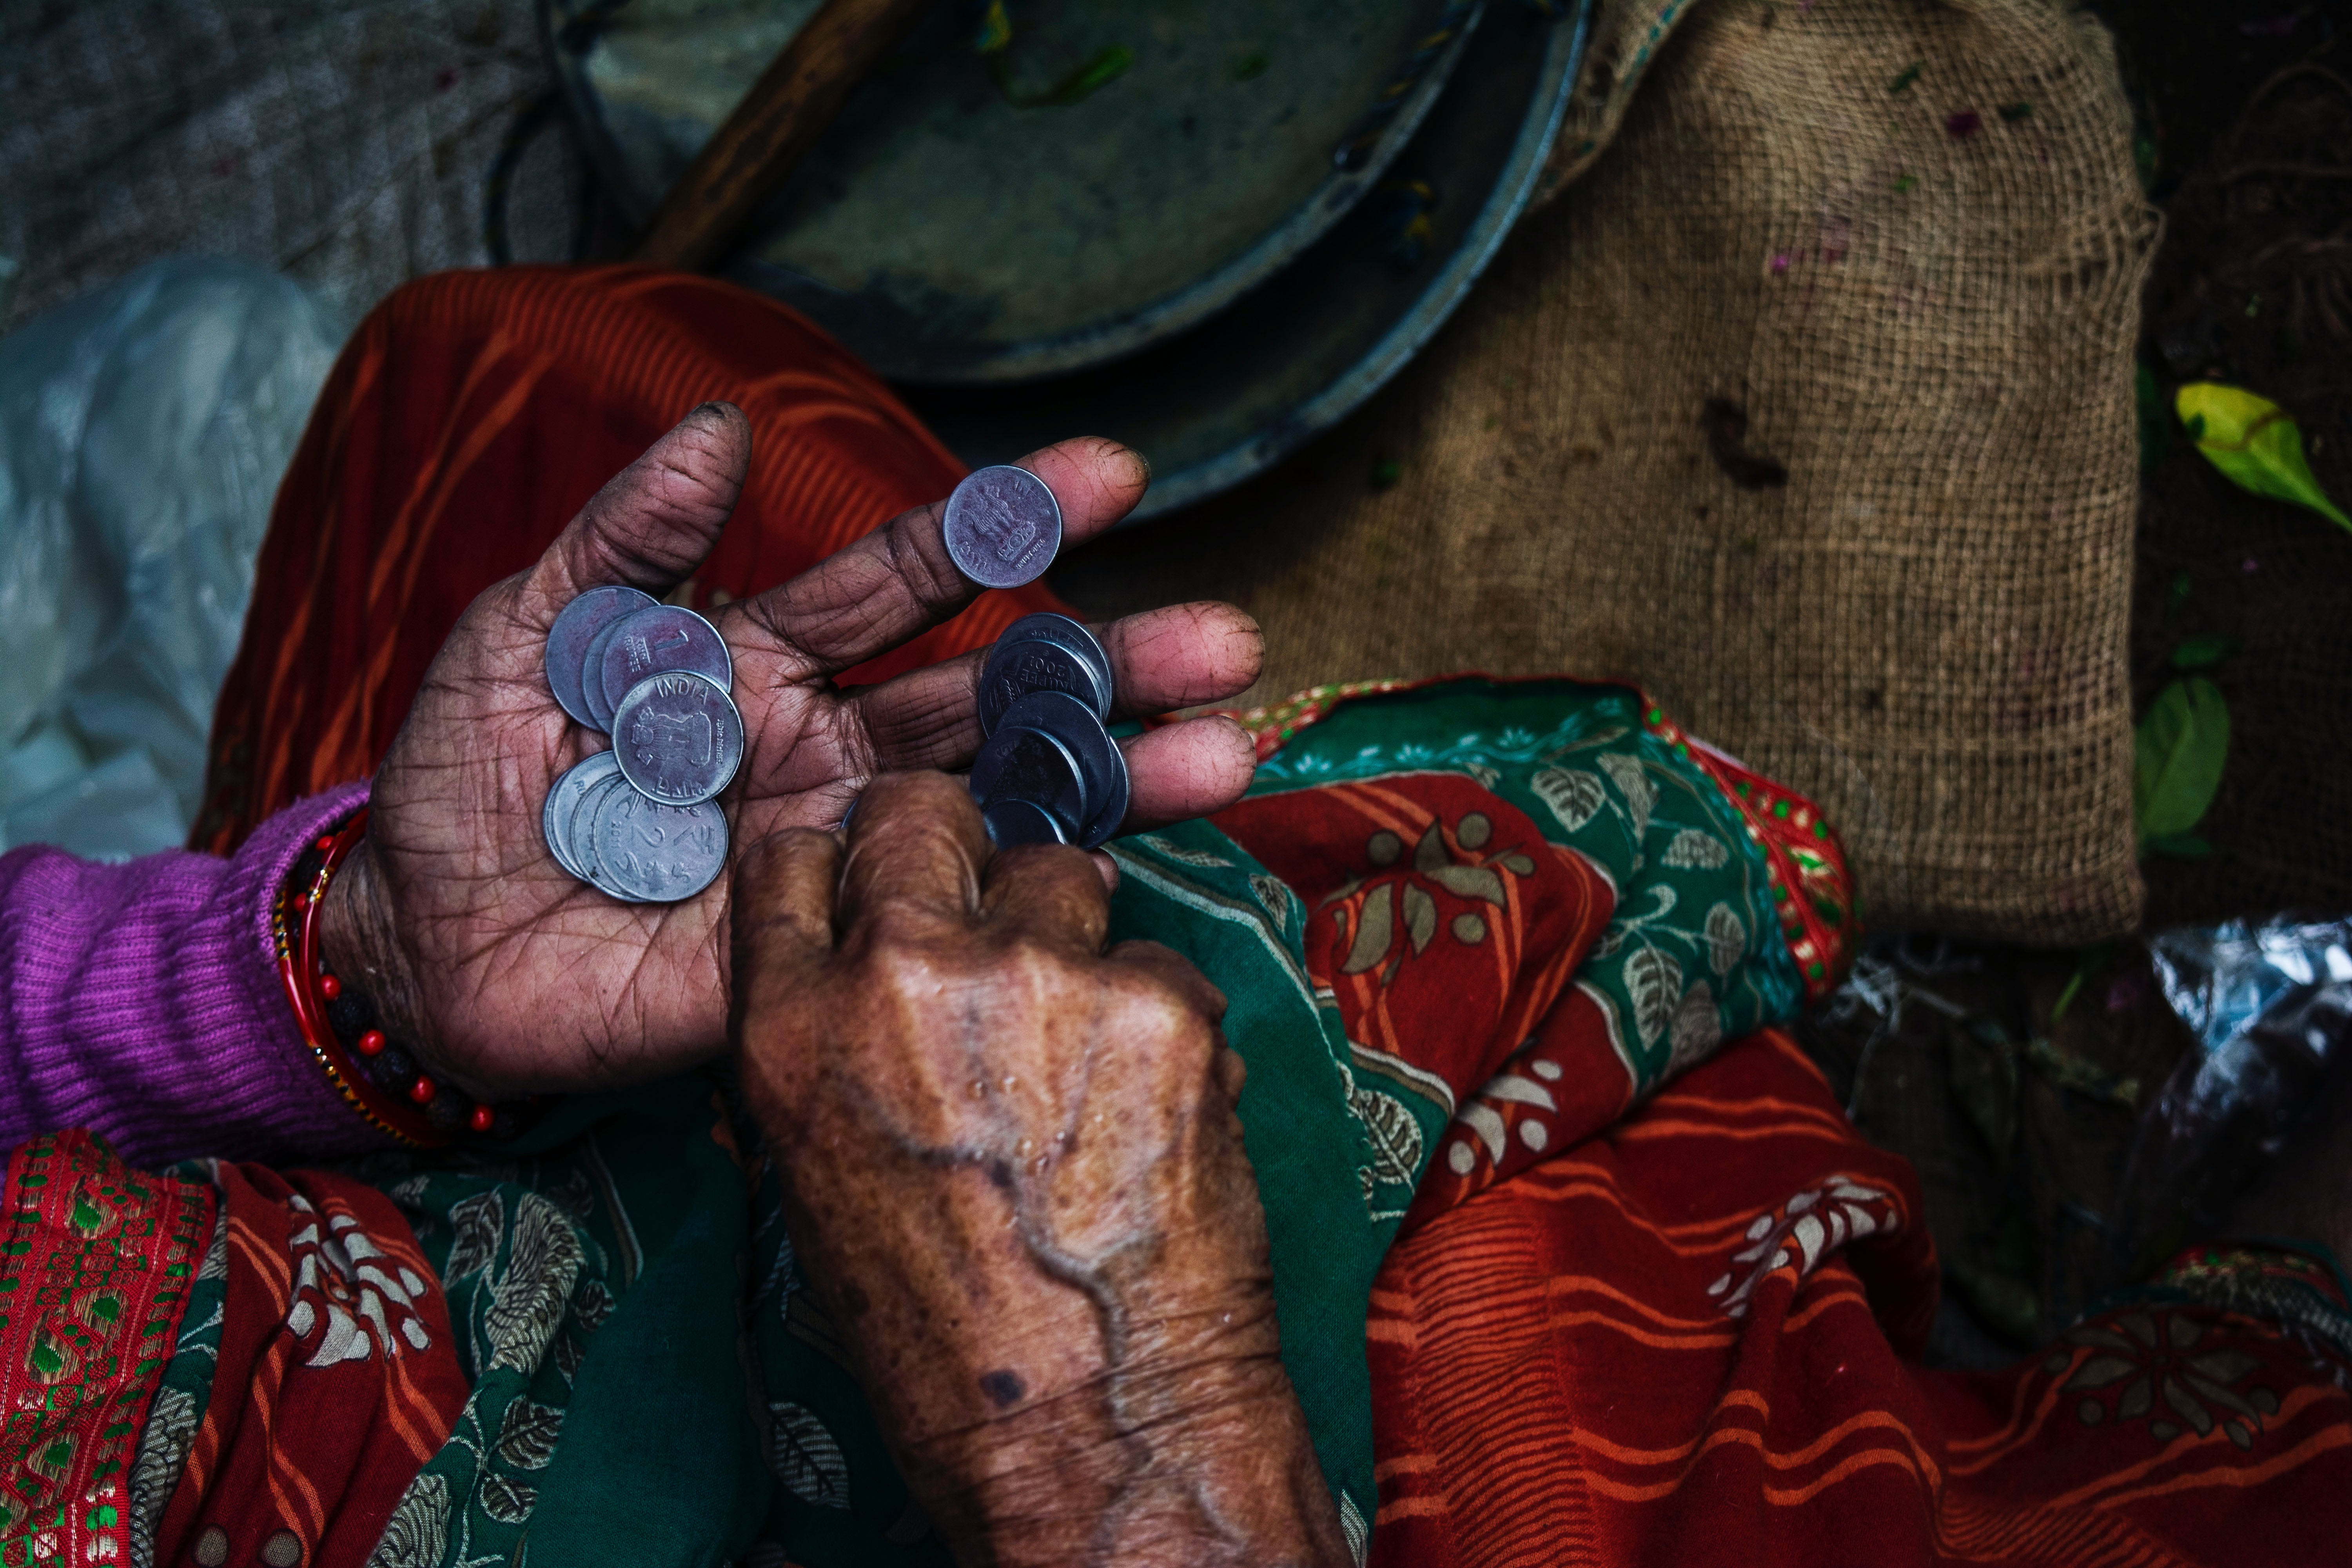 A lady counting coins